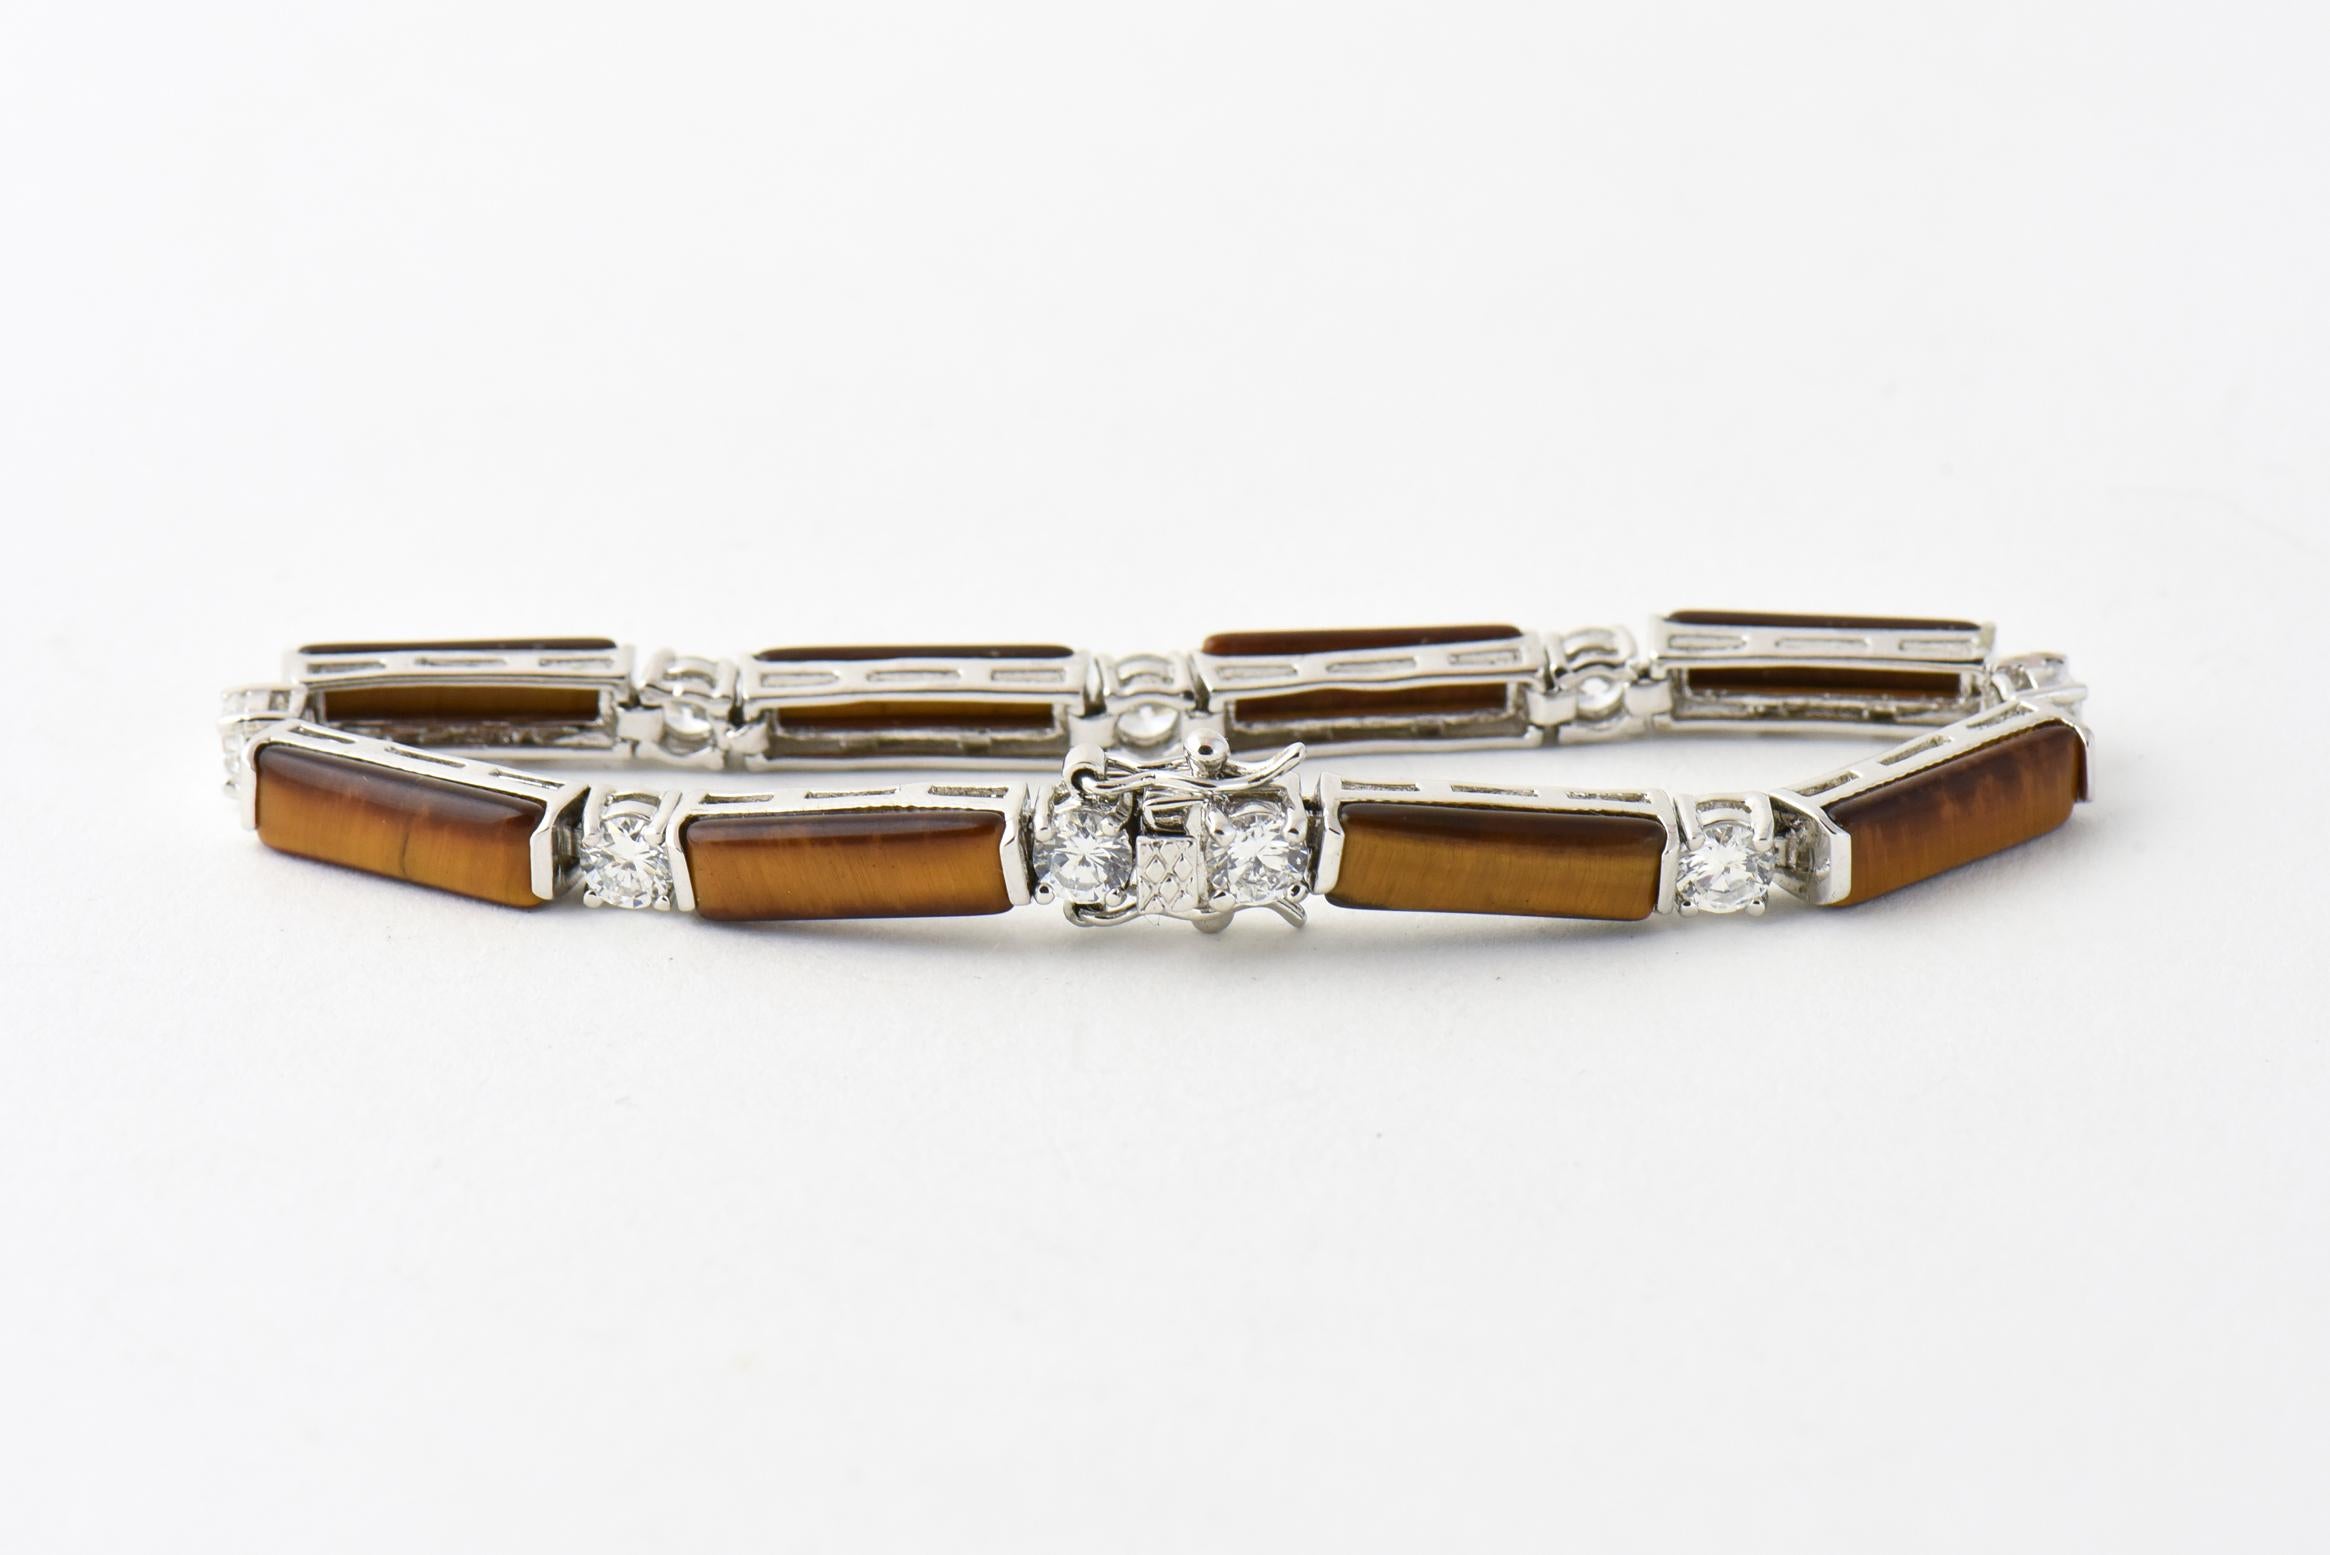 Sterling silver bracelet featuring tiger's-eye bars interspersed with cubic zirconias. Push clasp with safety. Marked: 925.